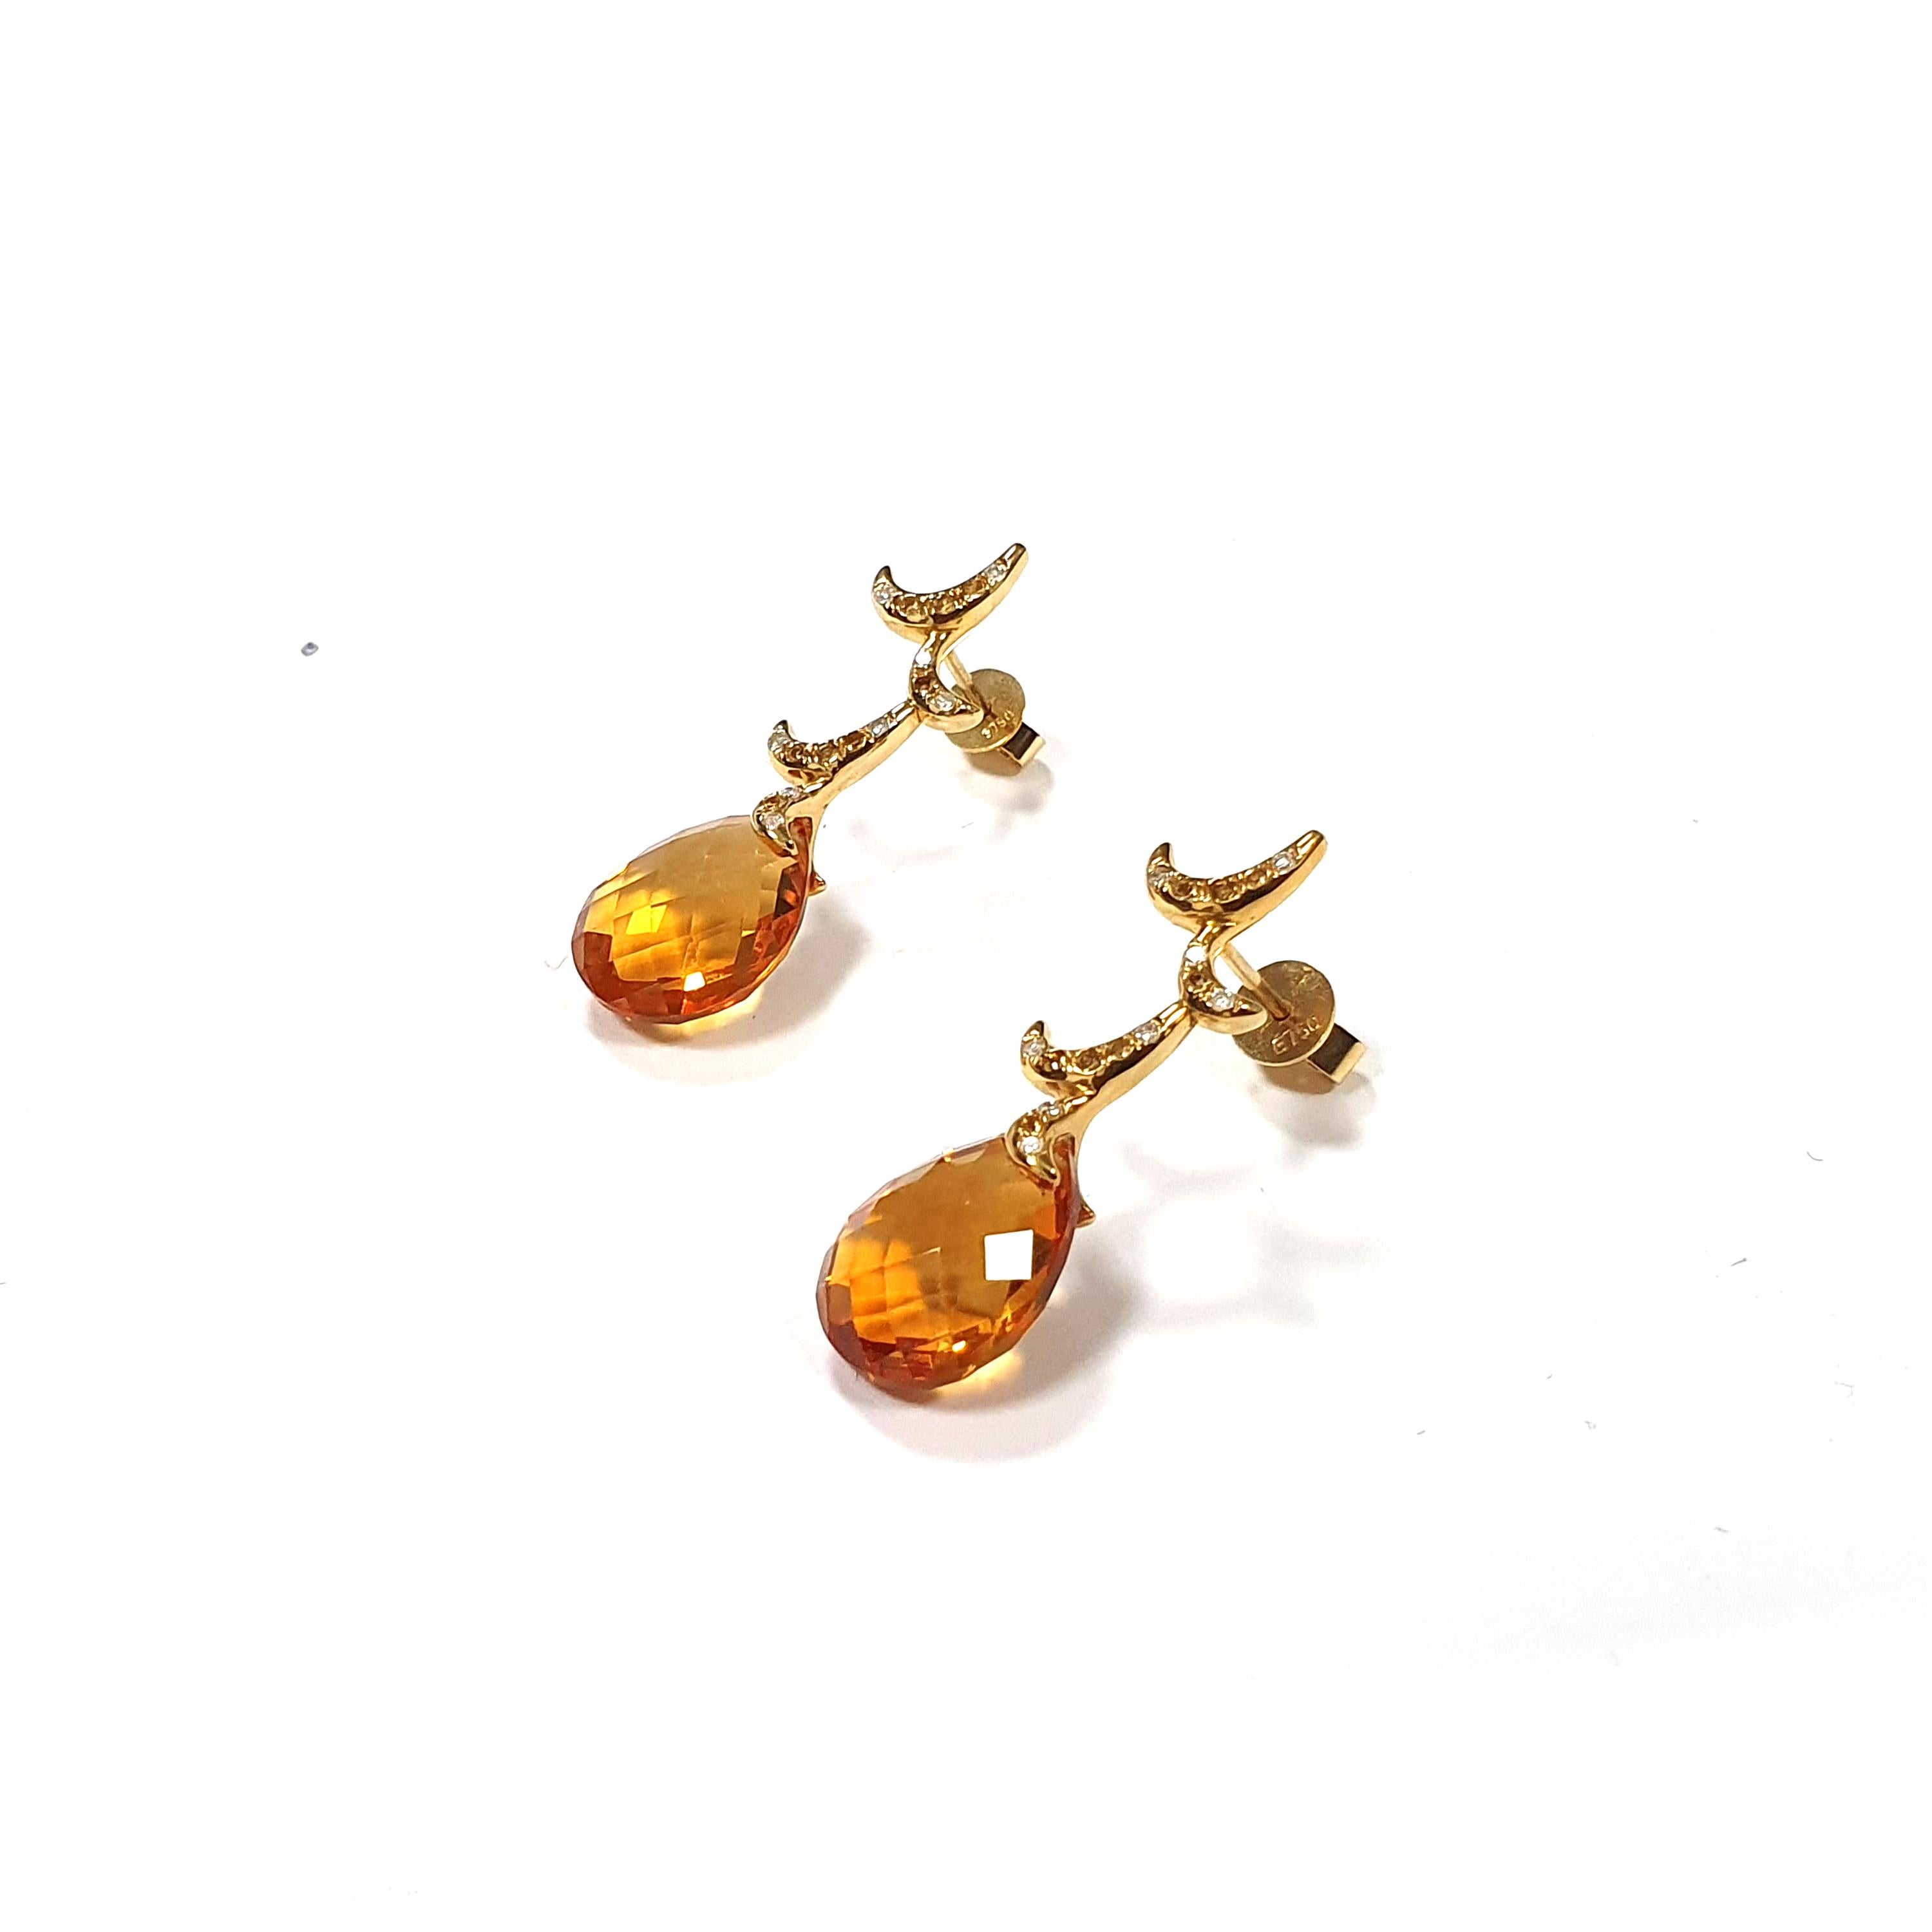 Description:
Whispering medium briolette earrings featuring 13mm x 10mm citrine briolettes and 0.10ct diamonds and 0.05ct citrines. Set in high polish 18ct yellow gold.

Inspiration:
Emulating femininity and glamour, the Whispering collection is